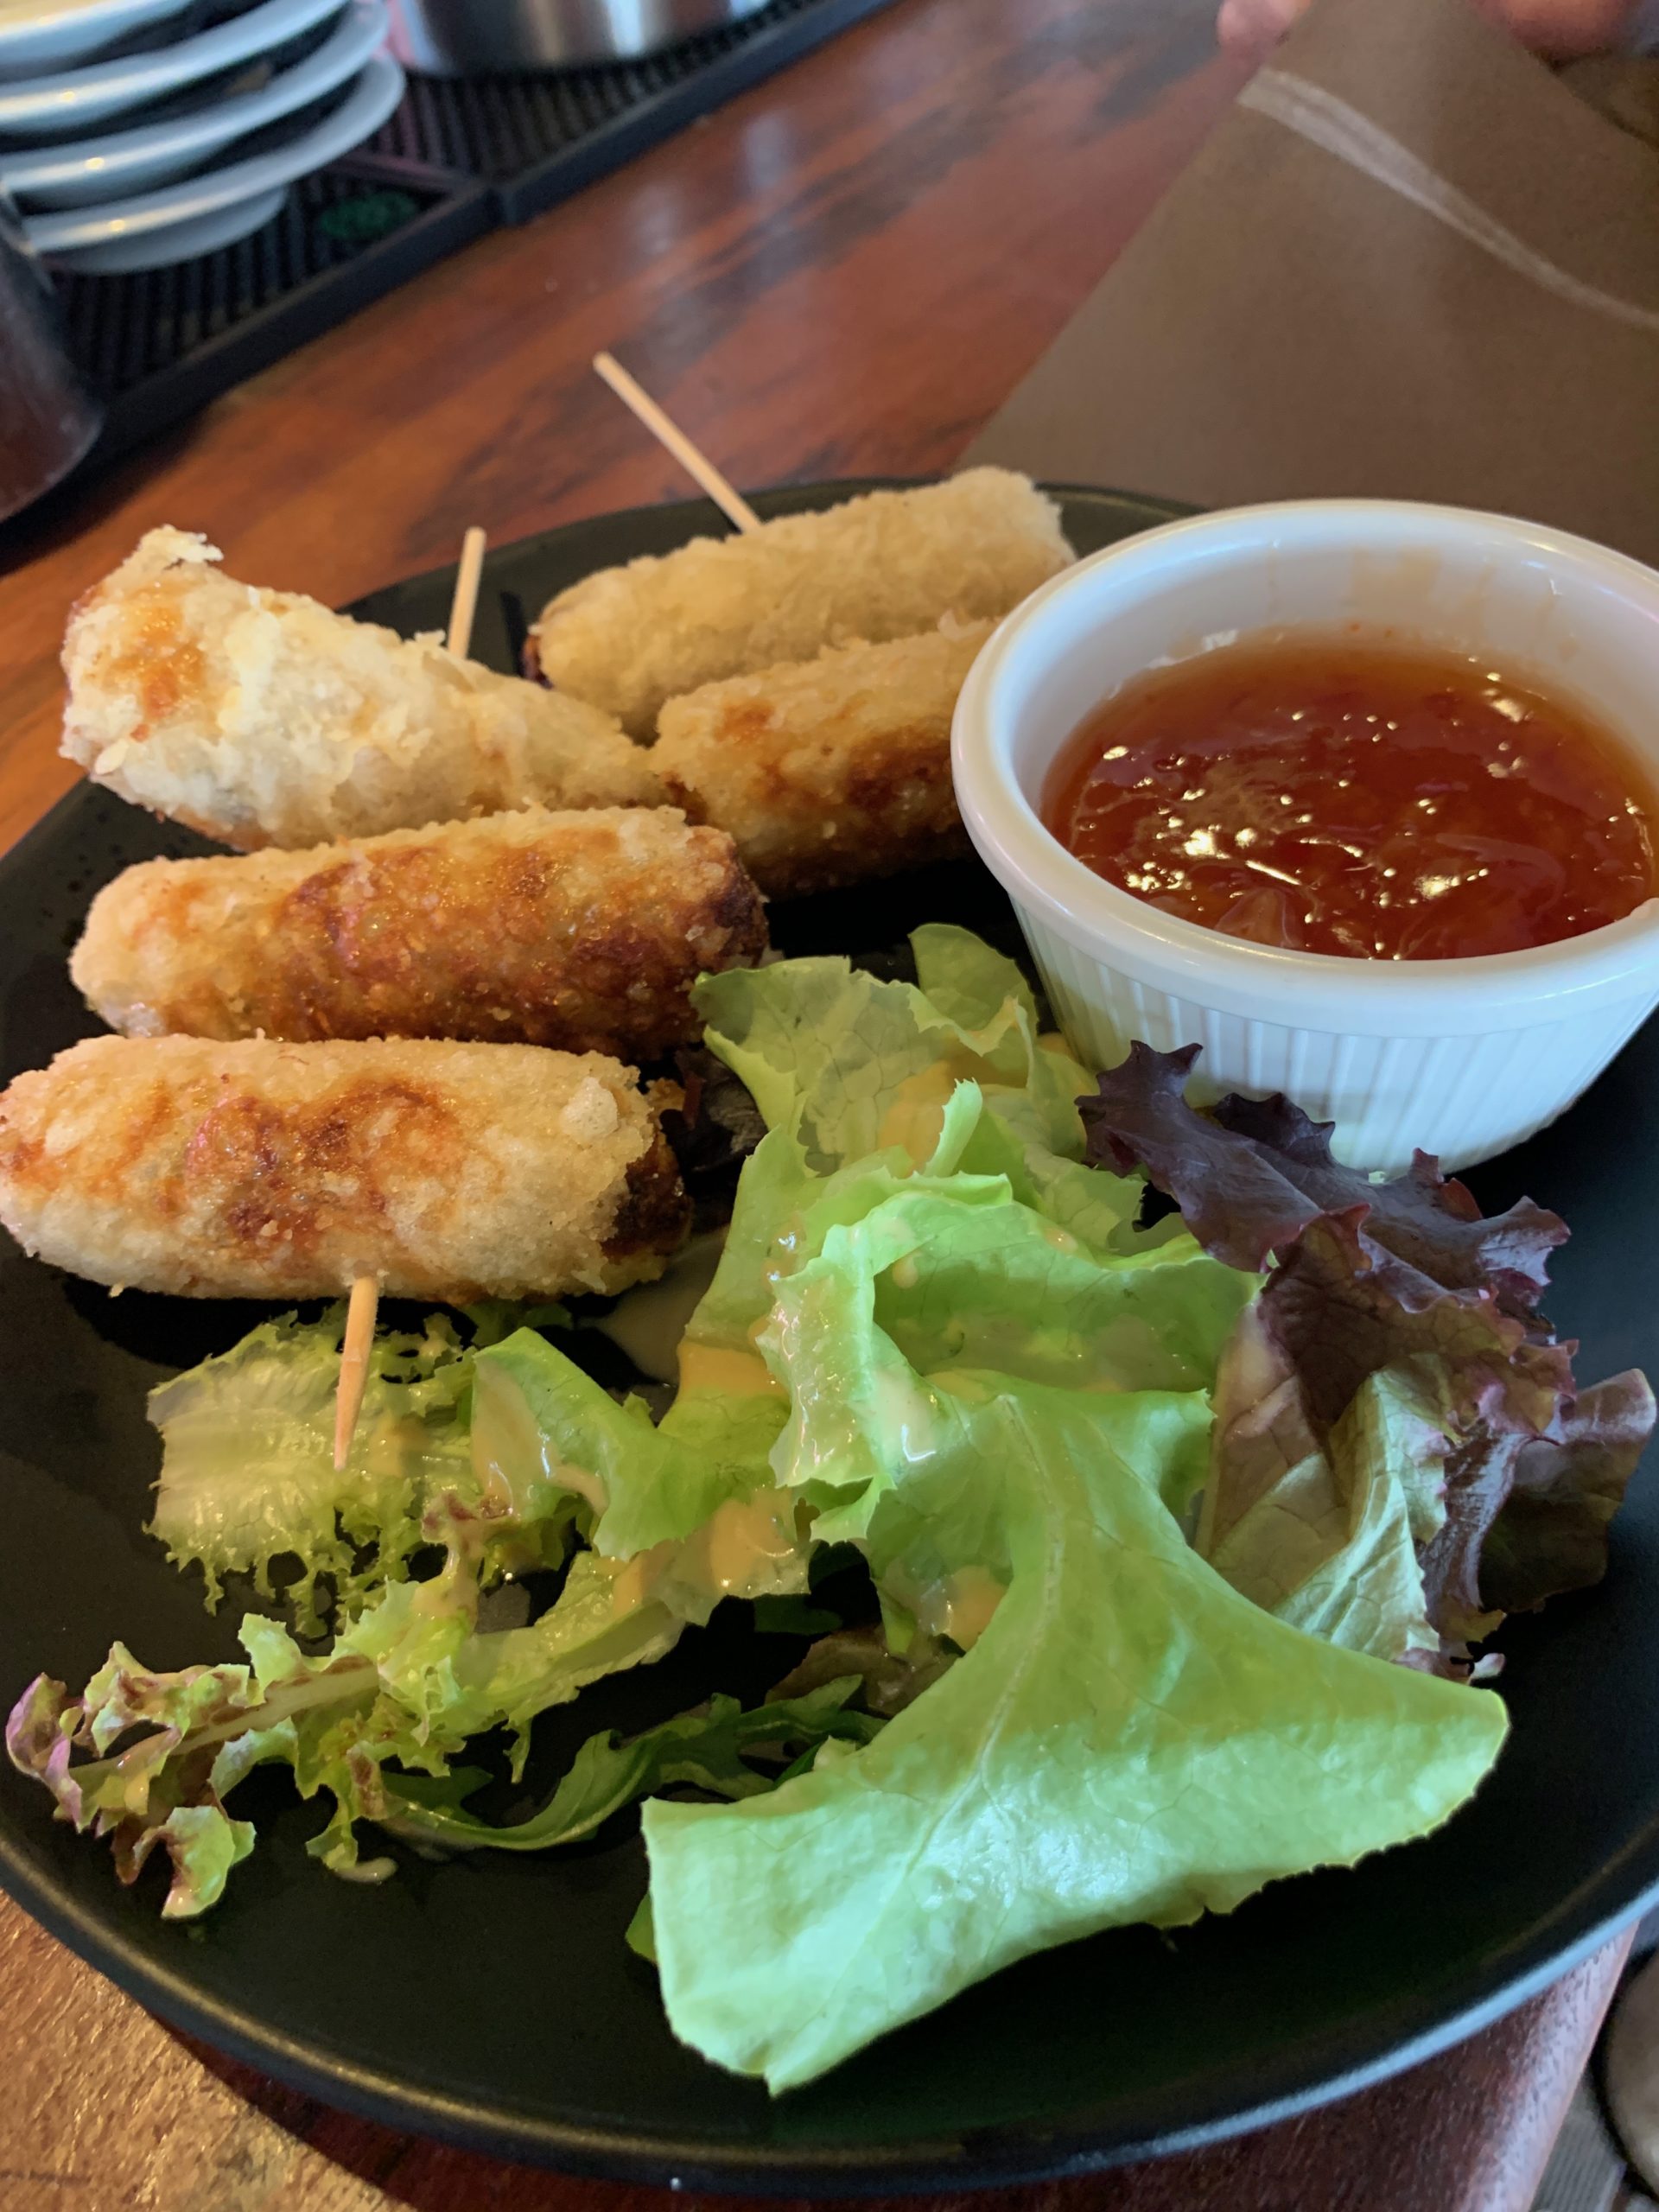 Nems (fried spring rolls) and dipping sauce from Lili's Beach bar